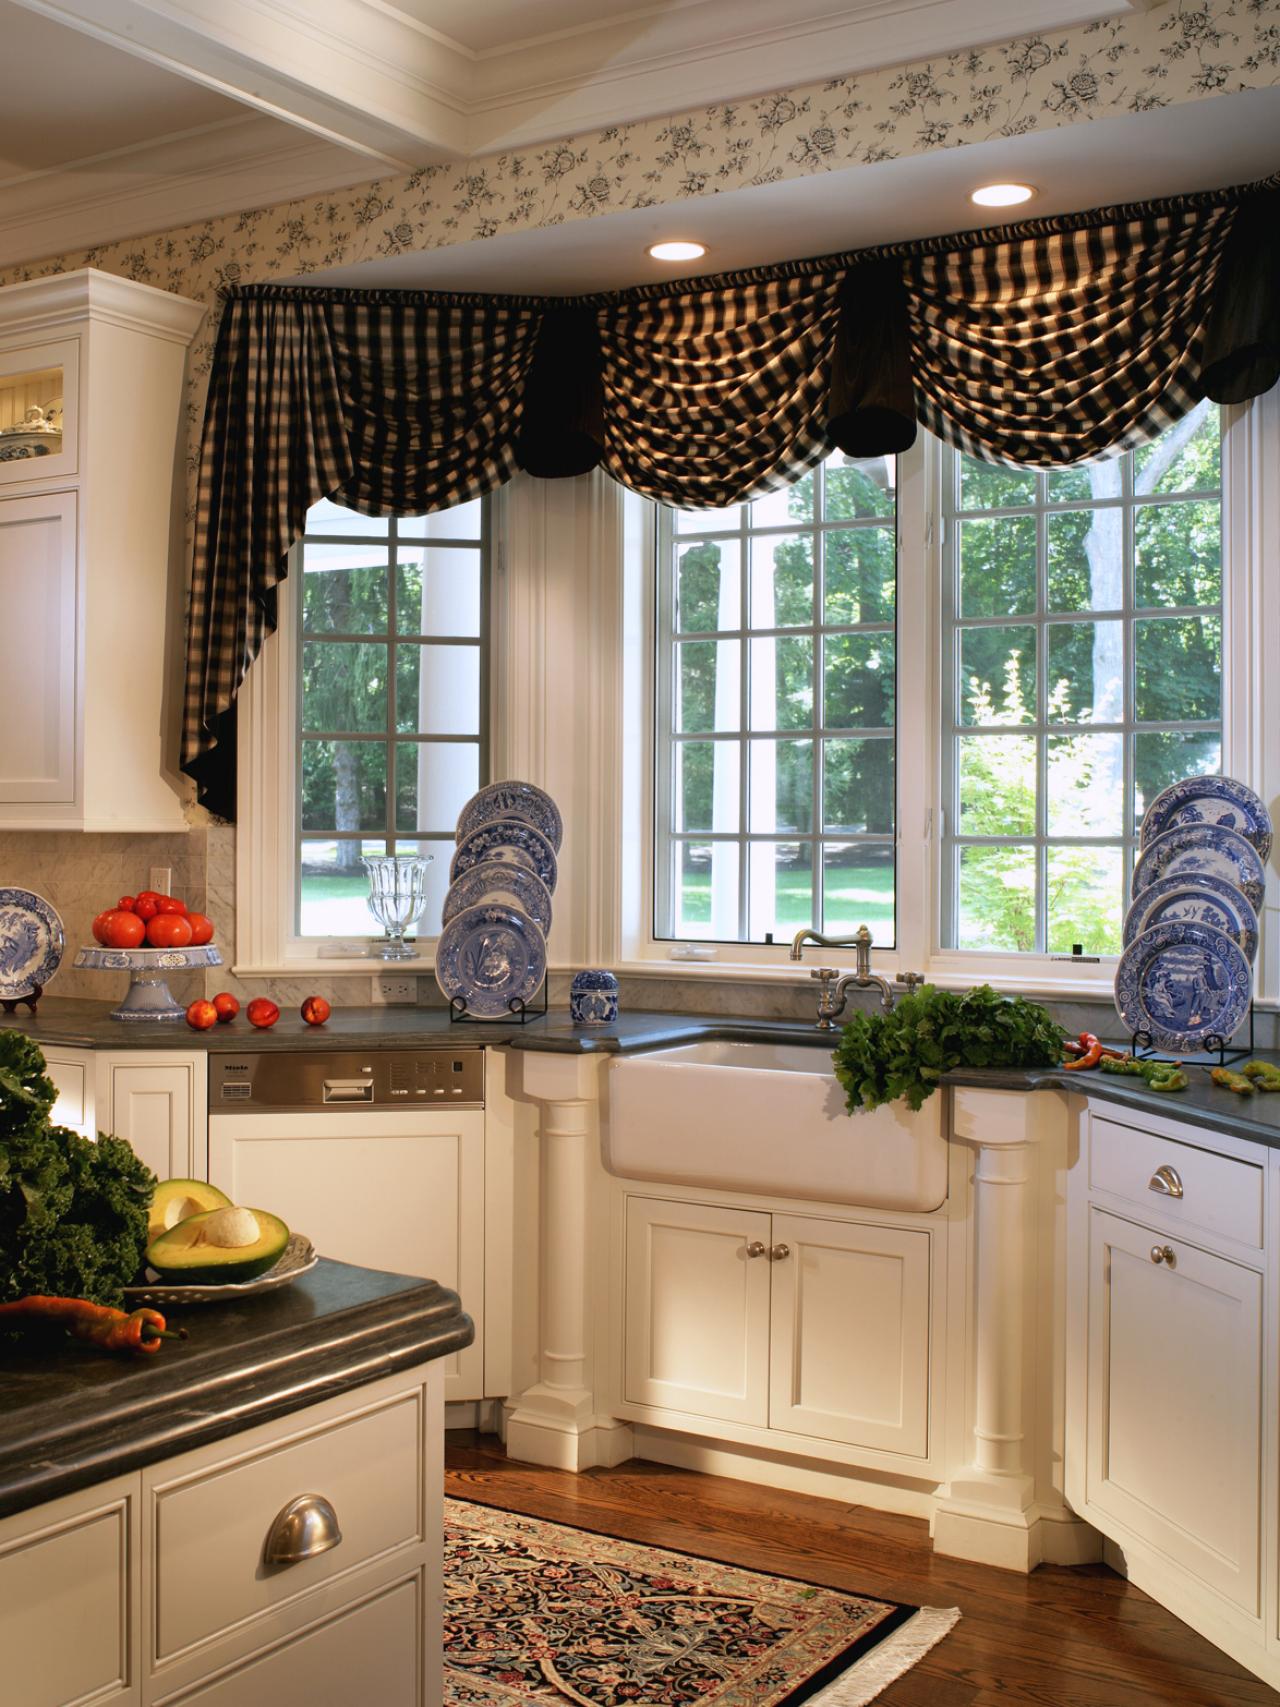 Kitchen Curtains That Will Warm Up the Heart of Your Home | DIY